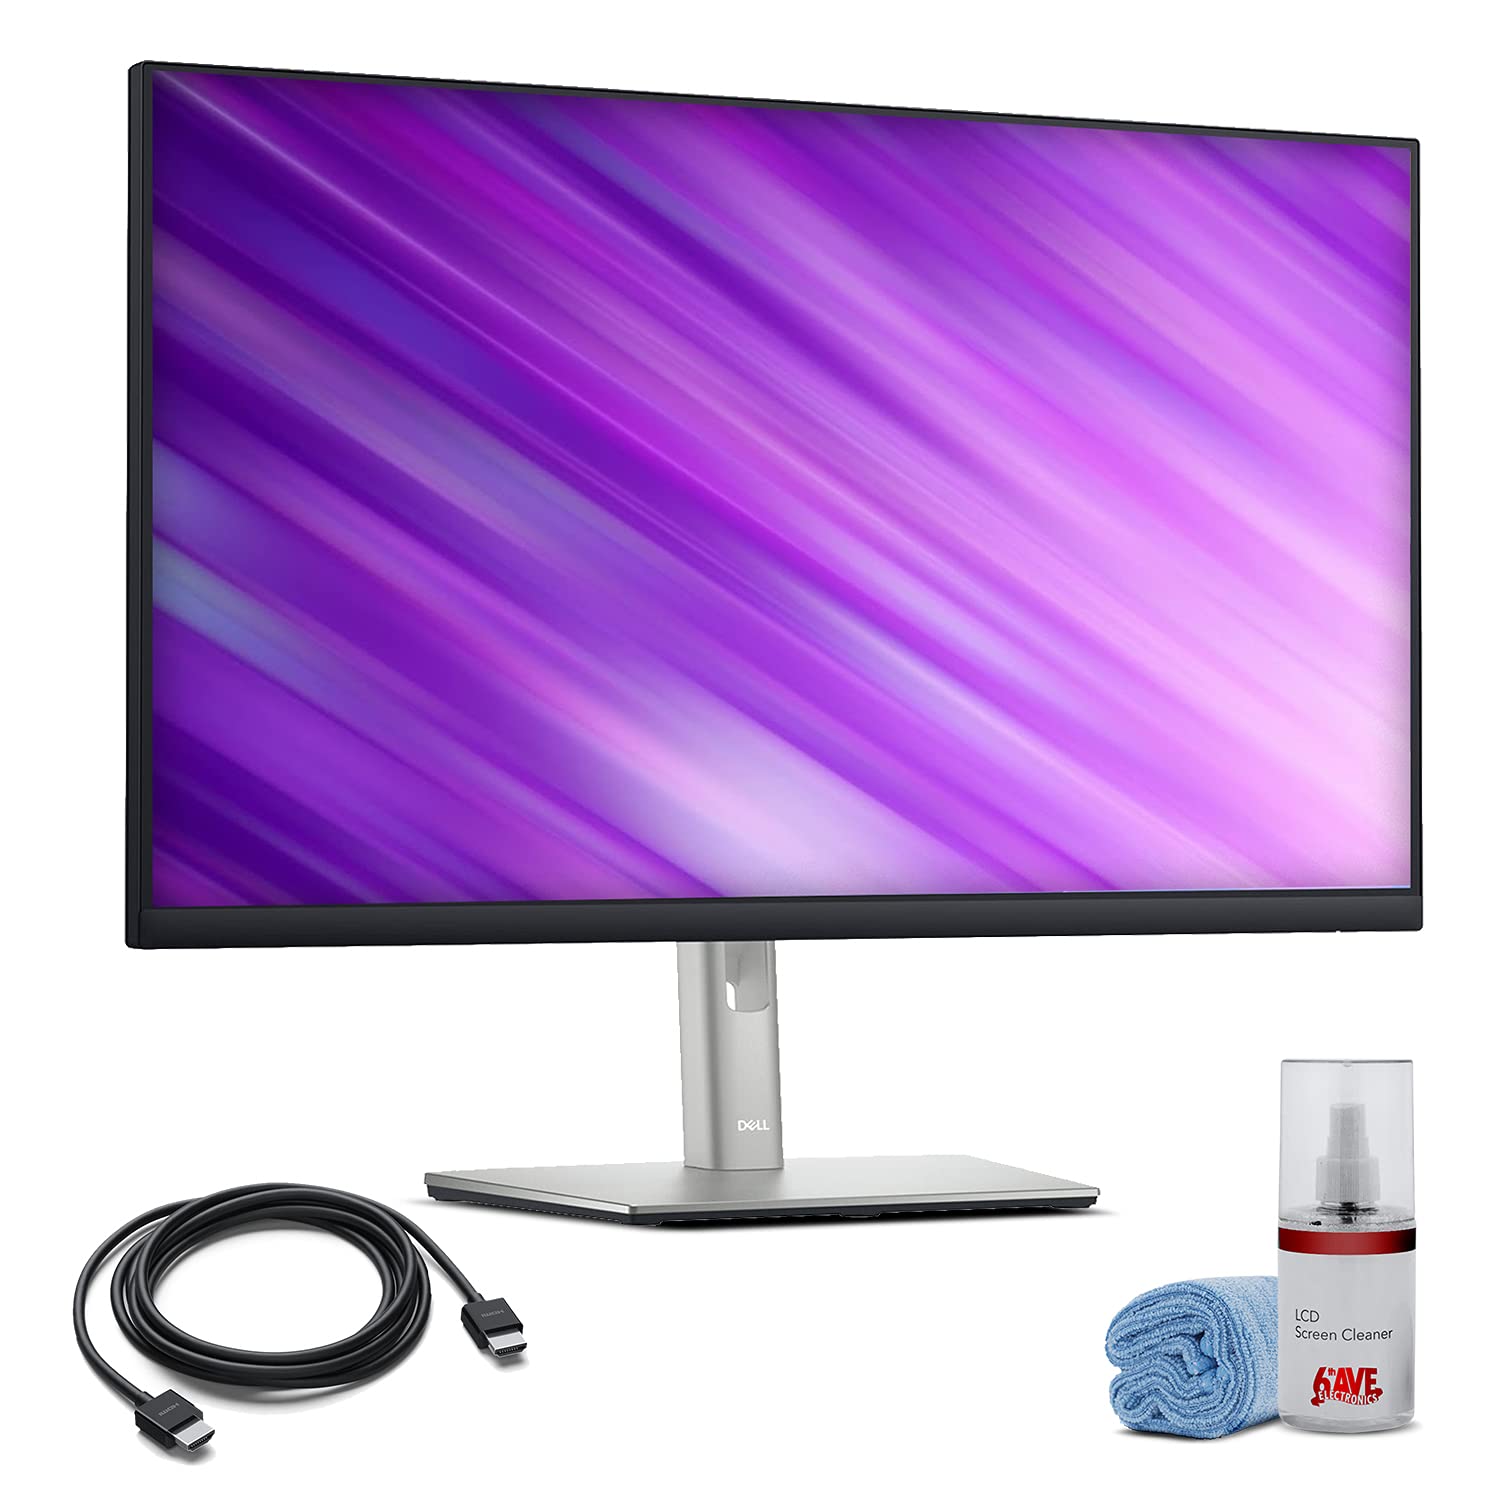 Dell P2722H 27" Full HD 1080p, 16:9 IPS Monitor (P2722H) + HDMI Cable + LCD Cleaning Kit